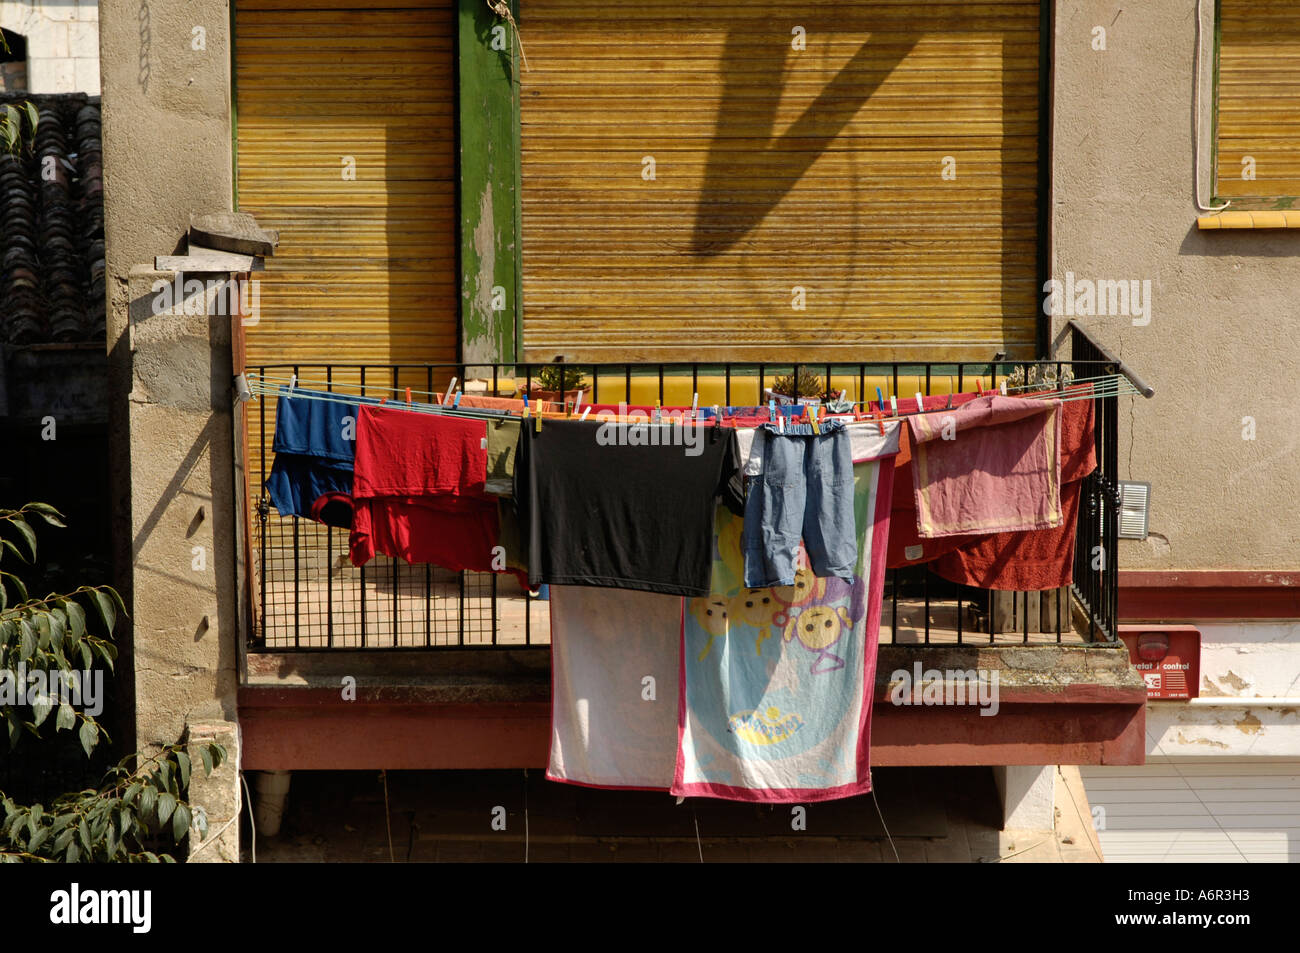 laundry drying on a clothesline on a balcony Stock Photo